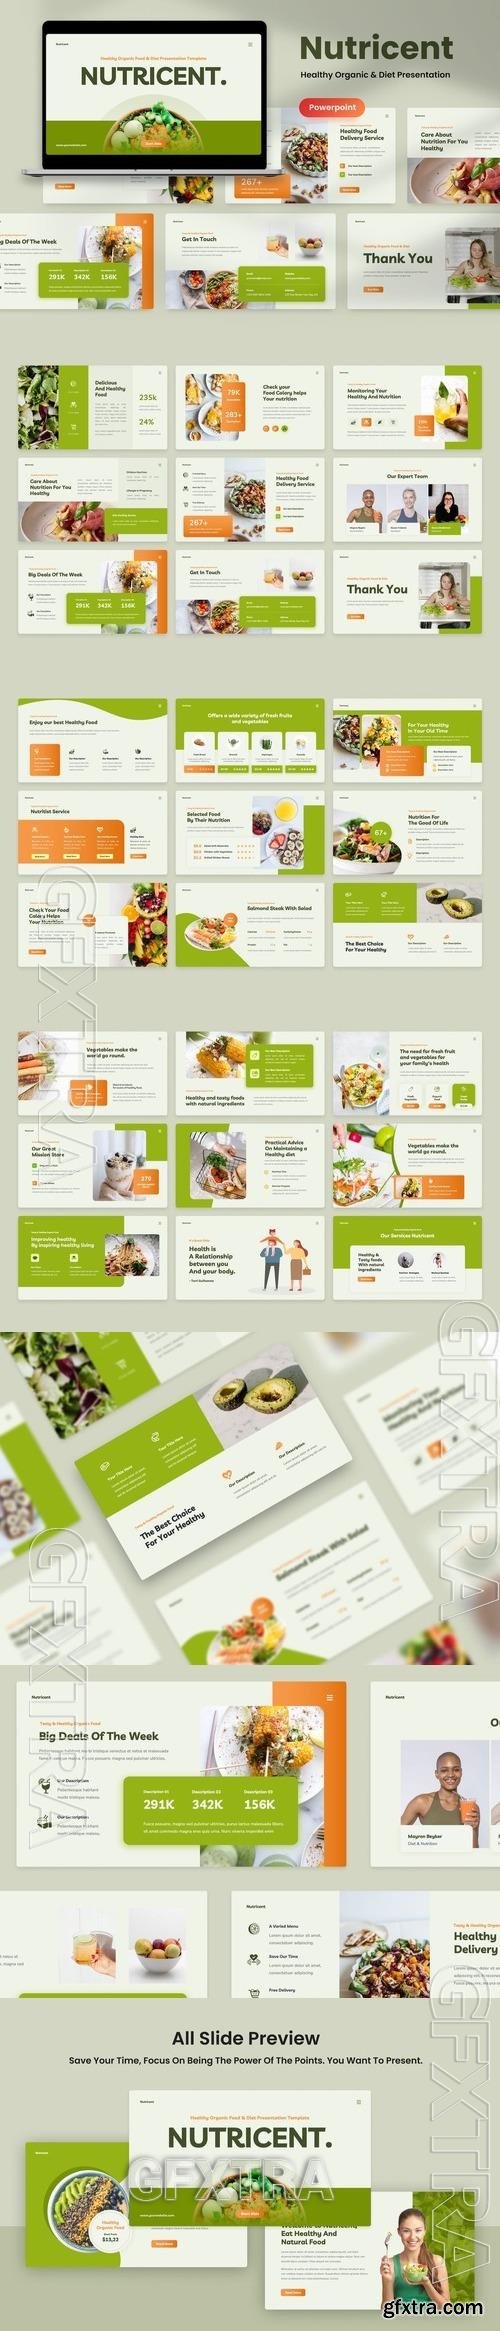 Nutricent - Healthy Organic Food Diet PowerPoint, Keynote and Google Slides